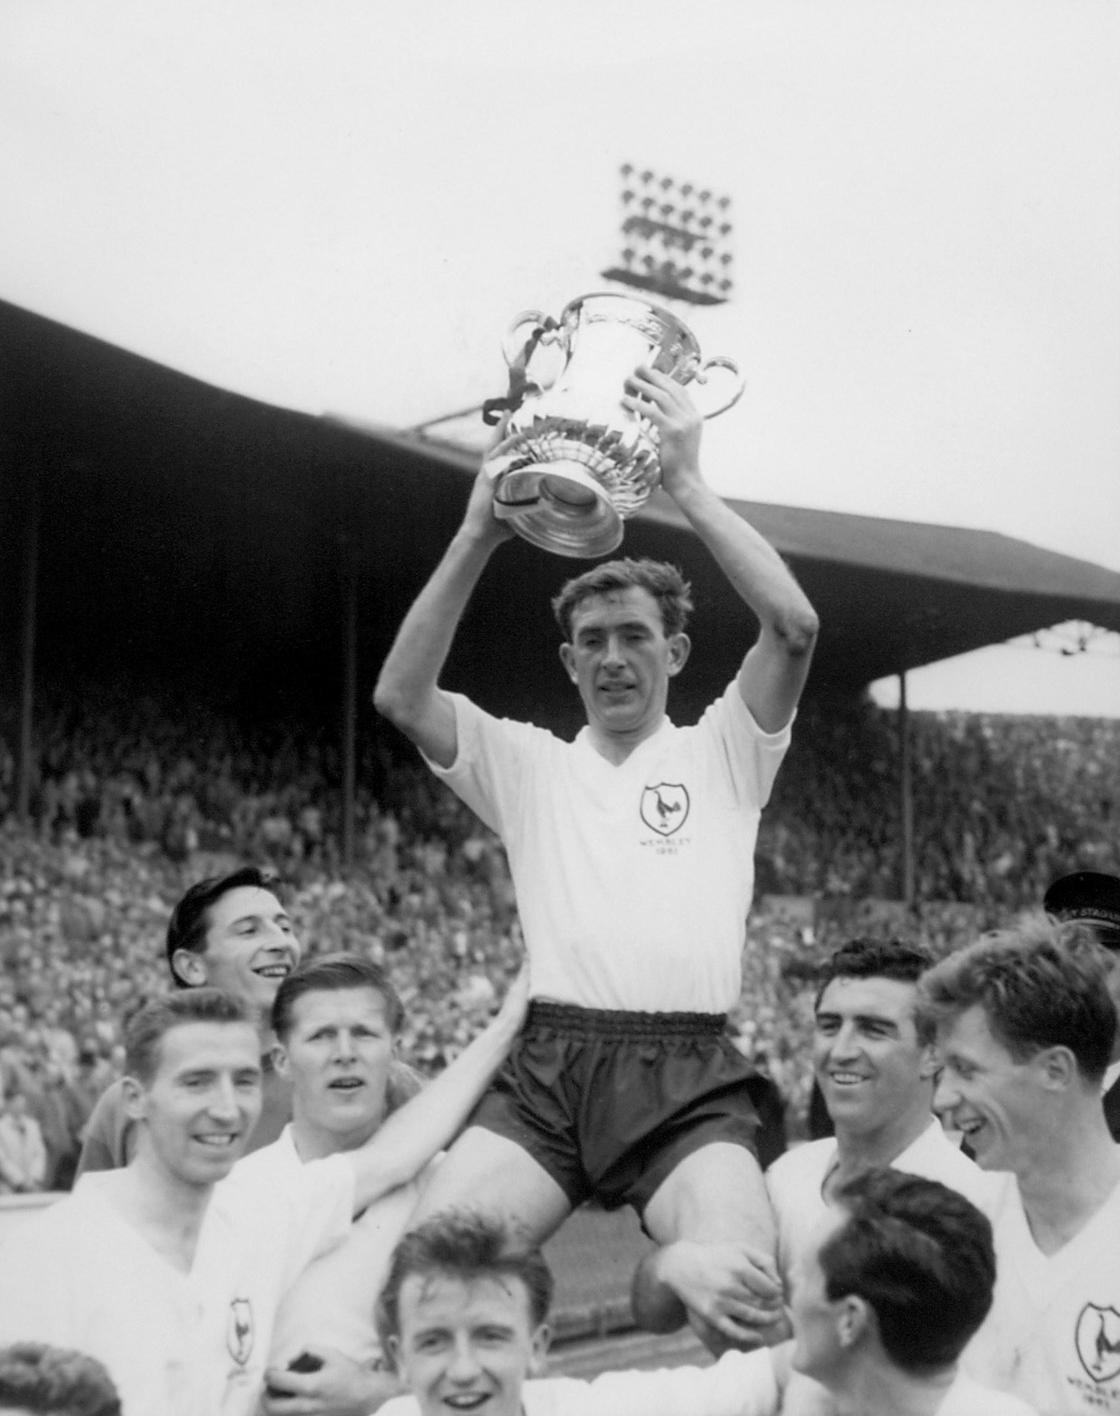 Top 10 Tottenham Hotspurs legends of all time: who is the best?